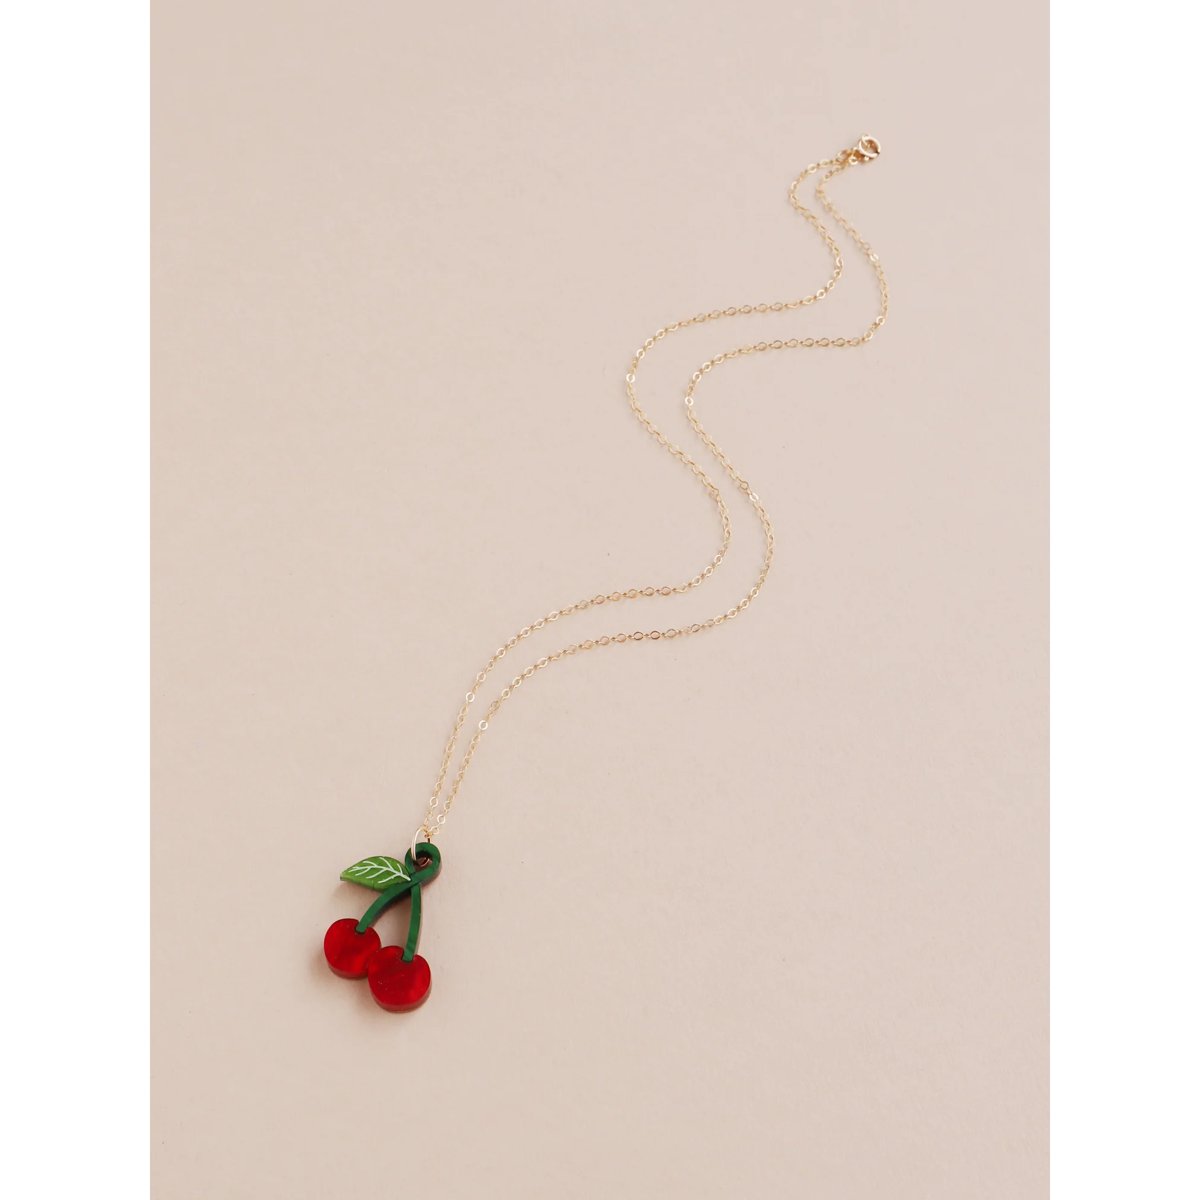 mondocherry - Wolf and Moon | cherry necklace - chain